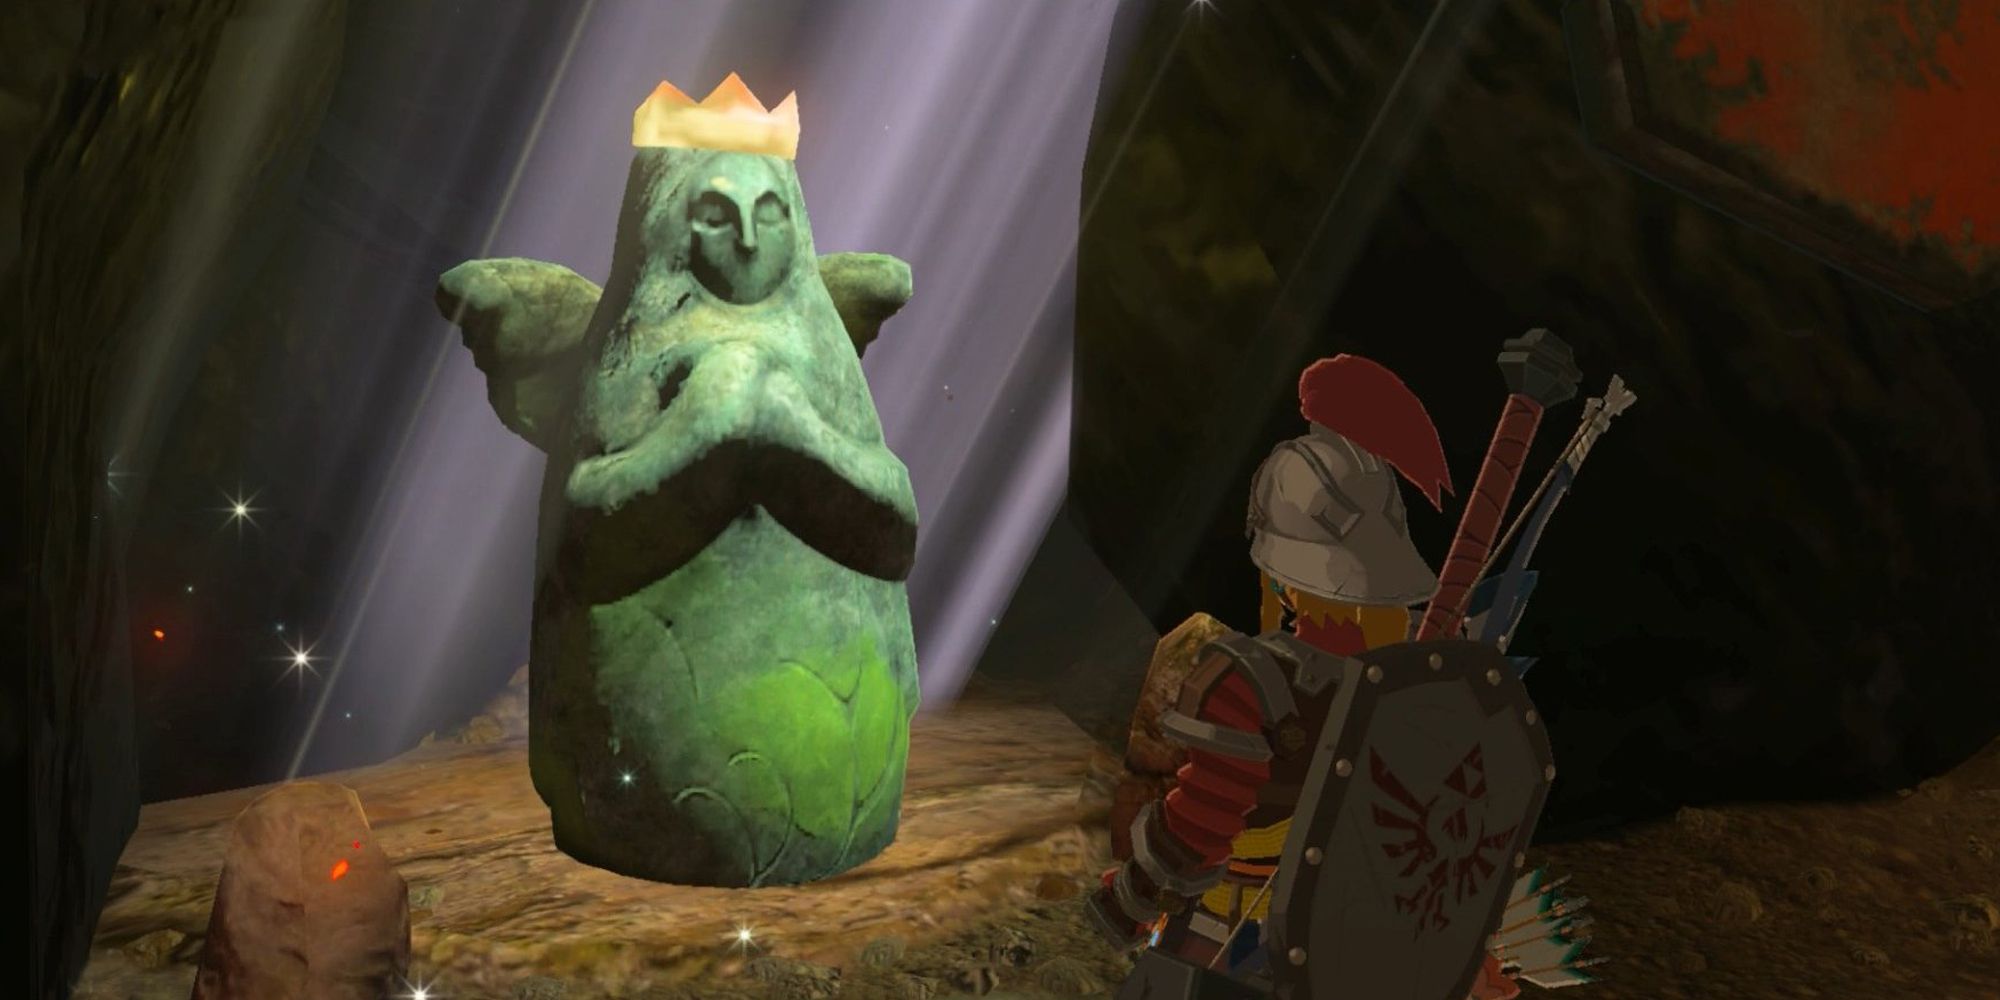 Link looks at the Hylian statue